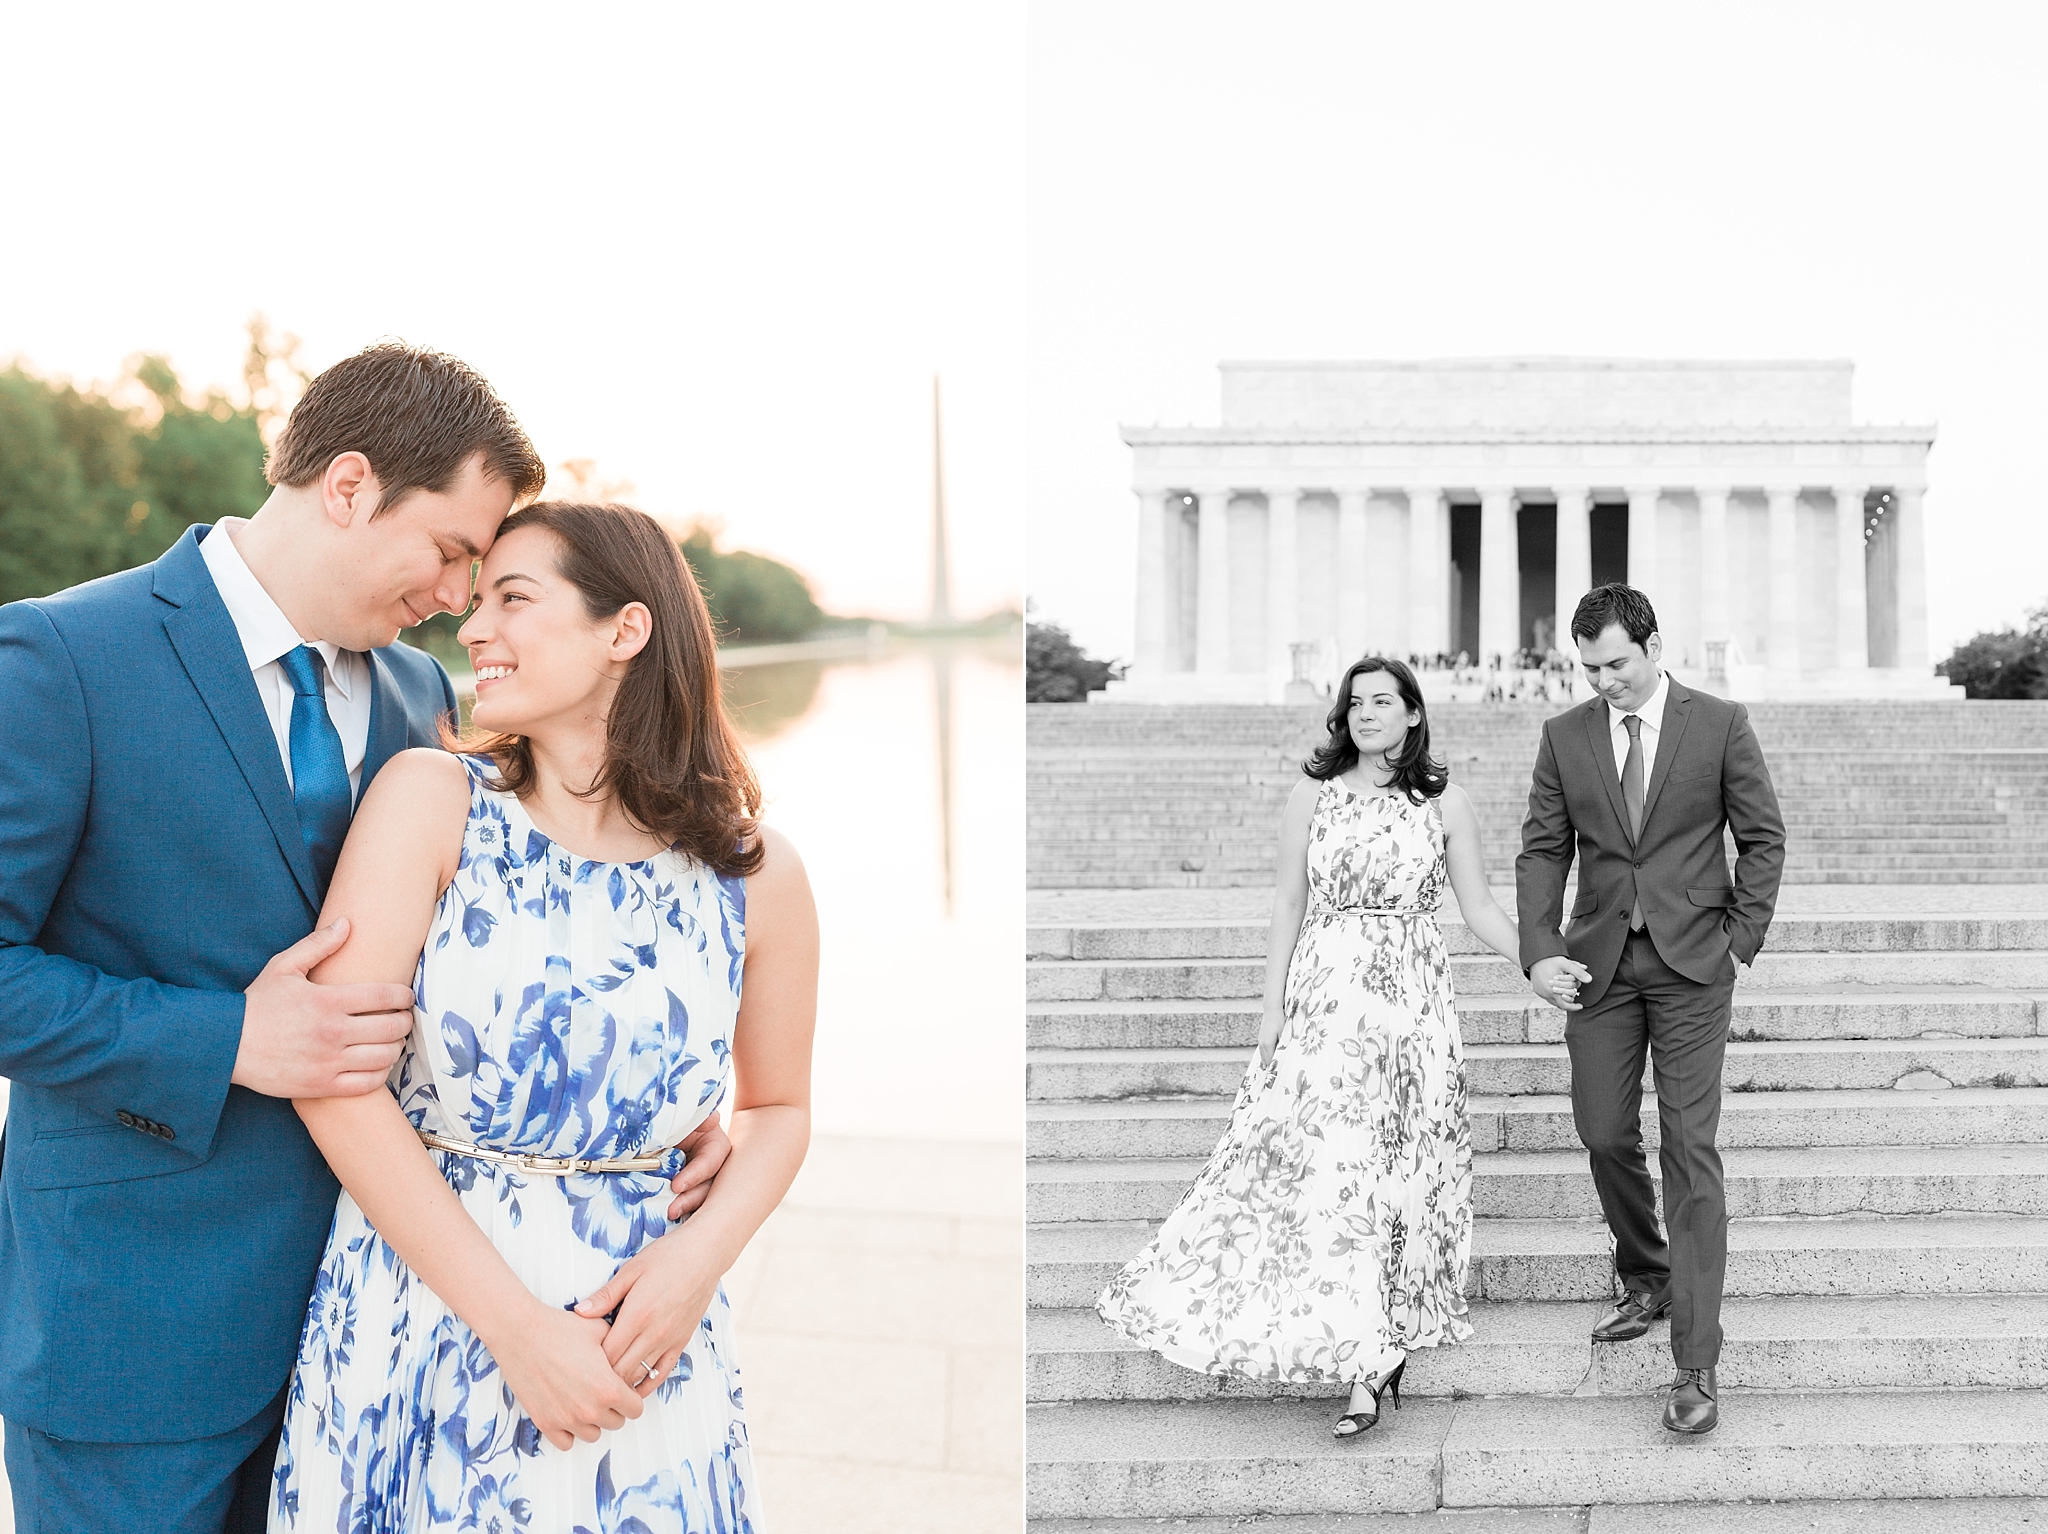 This romantic spring engagement session captures some of the most iconic highlights of Washington, DC including the Lincoln Memorial, Constitution Gardens, and DC War Memorial. 